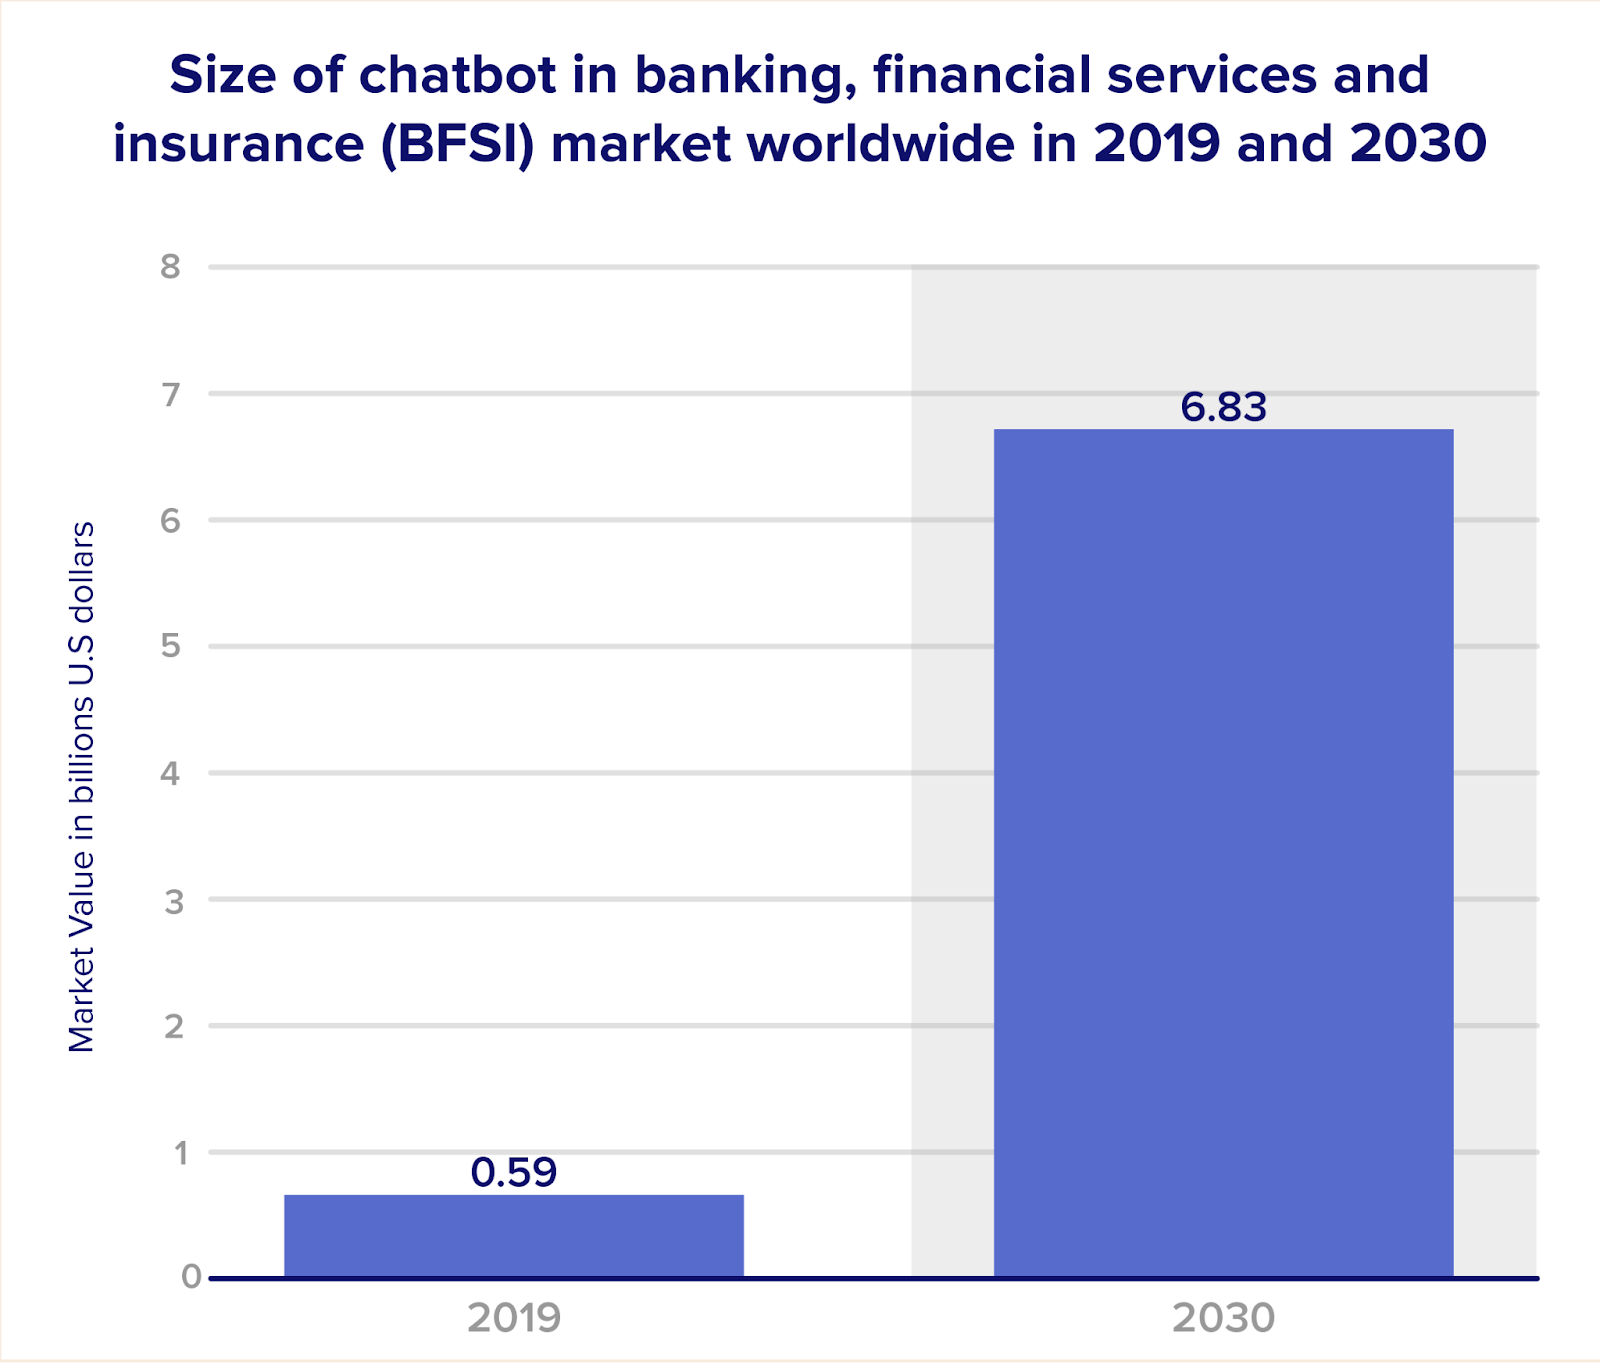 size of chatbot in BFSI market worldwide by 2030